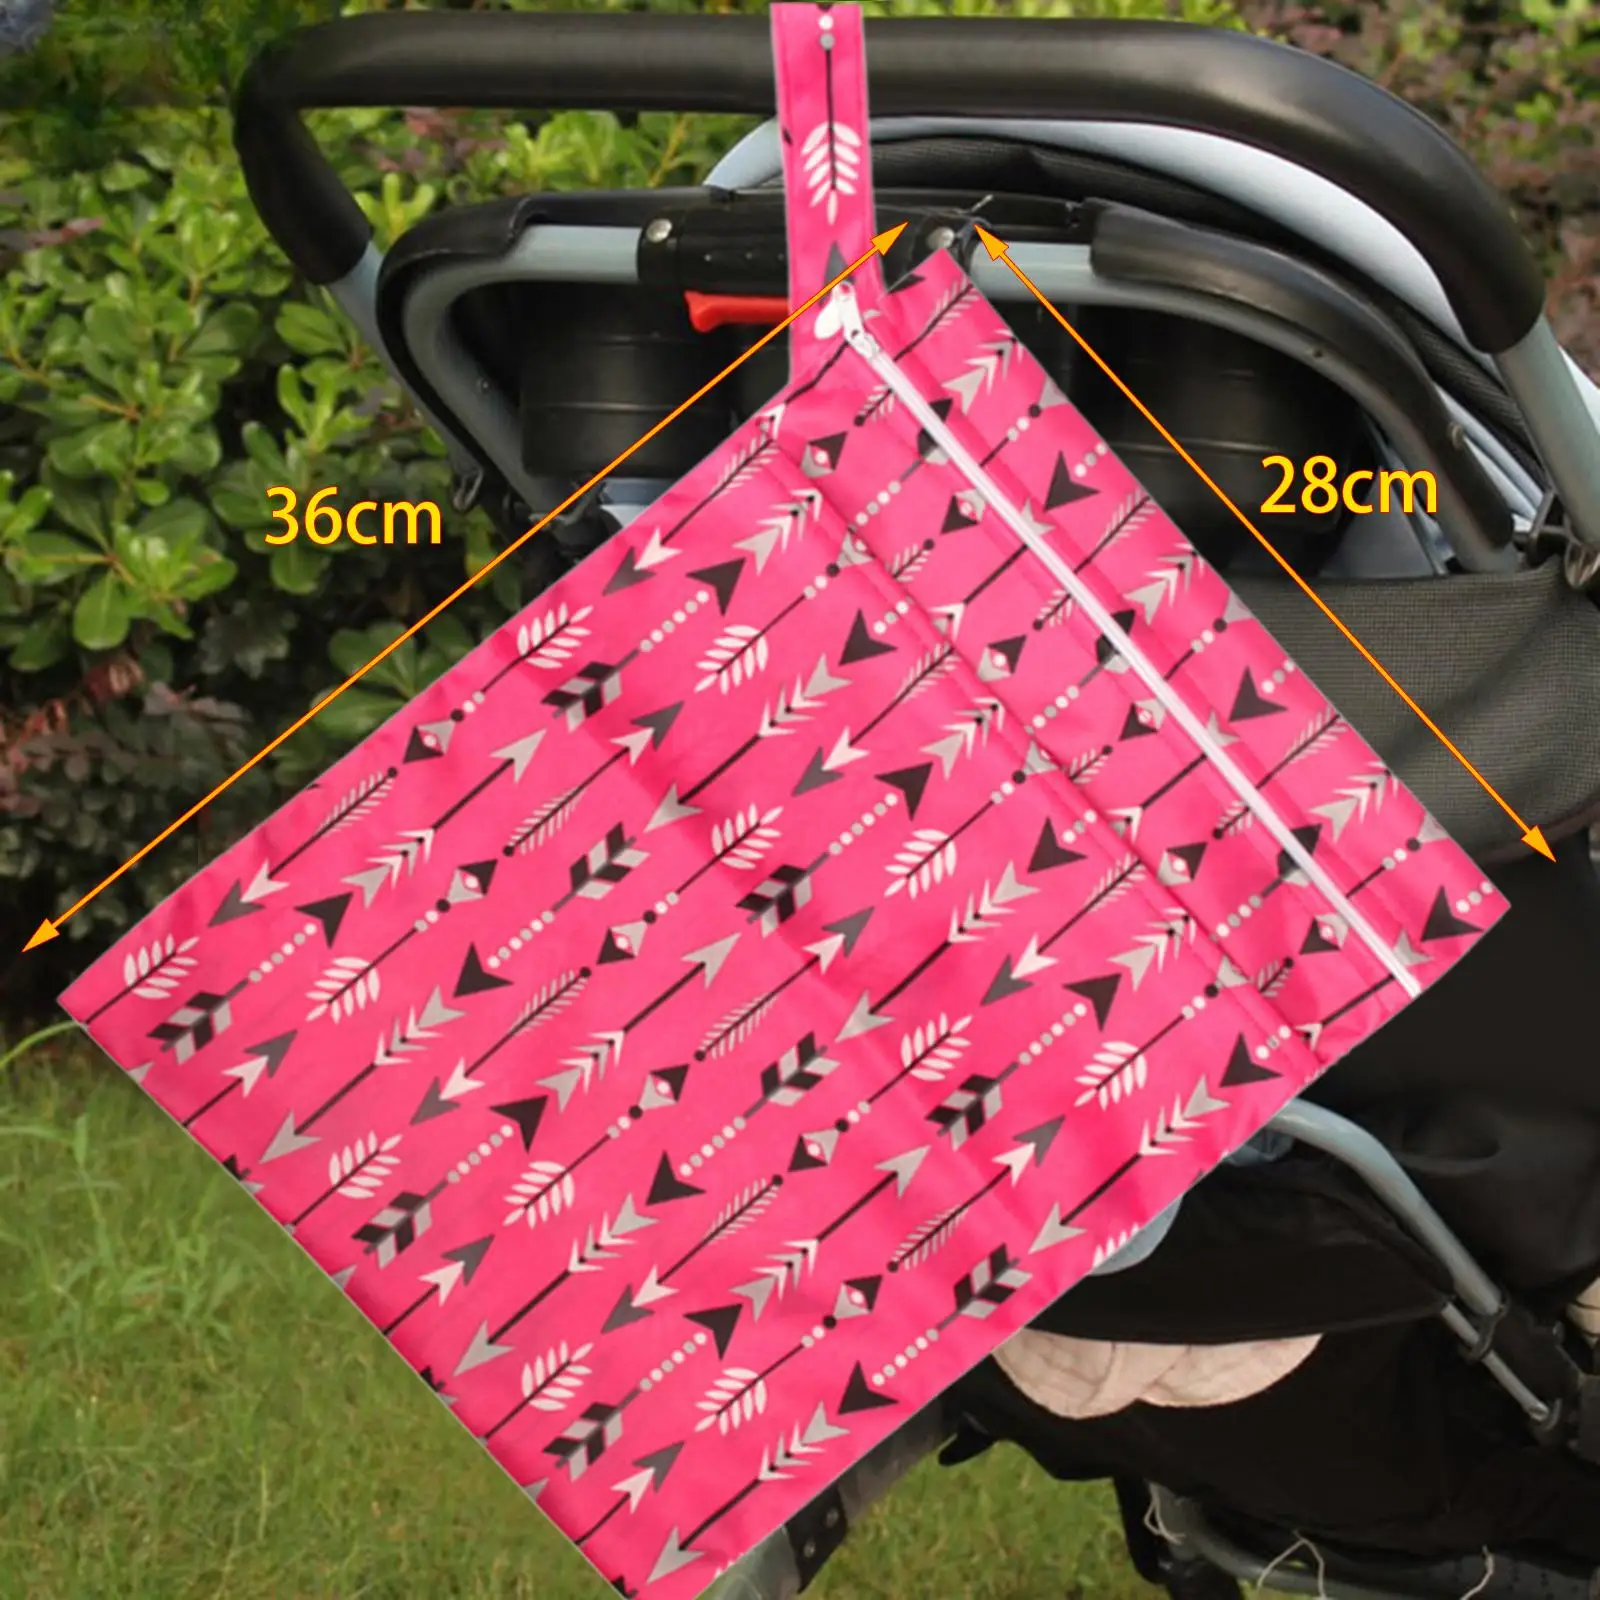 Diaper Pouch Printed Pocket Mummy Bag Baby Nappy Bag Stroller Diaper Storage Bag for Outdoor Beach Daycare Shopping Travel